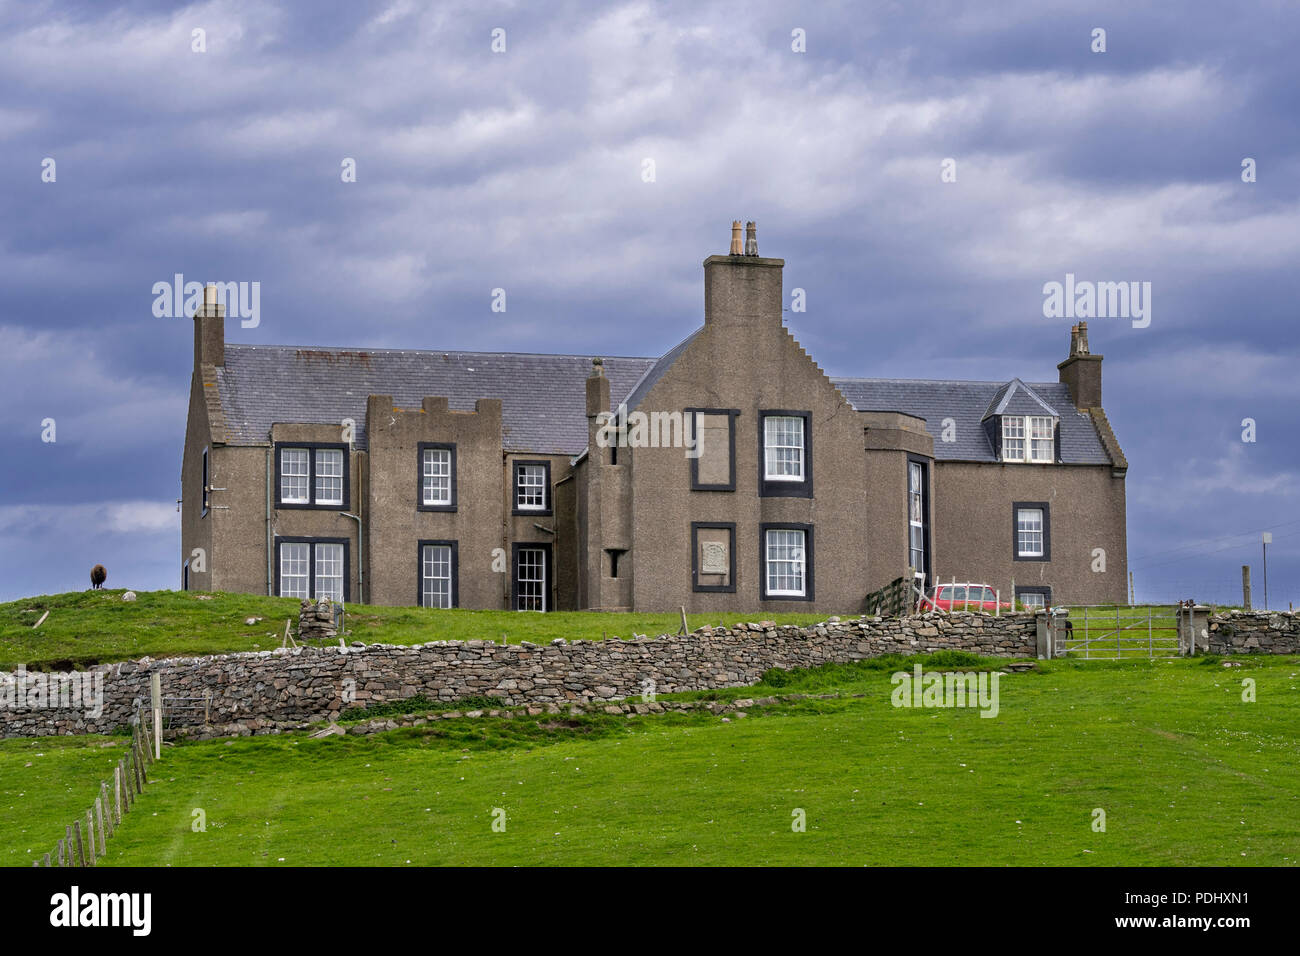 Lunna House, 17th-century laird's house and base of the wartime Shetland Bus operation on Lunna Ness in the Shetland Islands, Scotland, UK Stock Photo